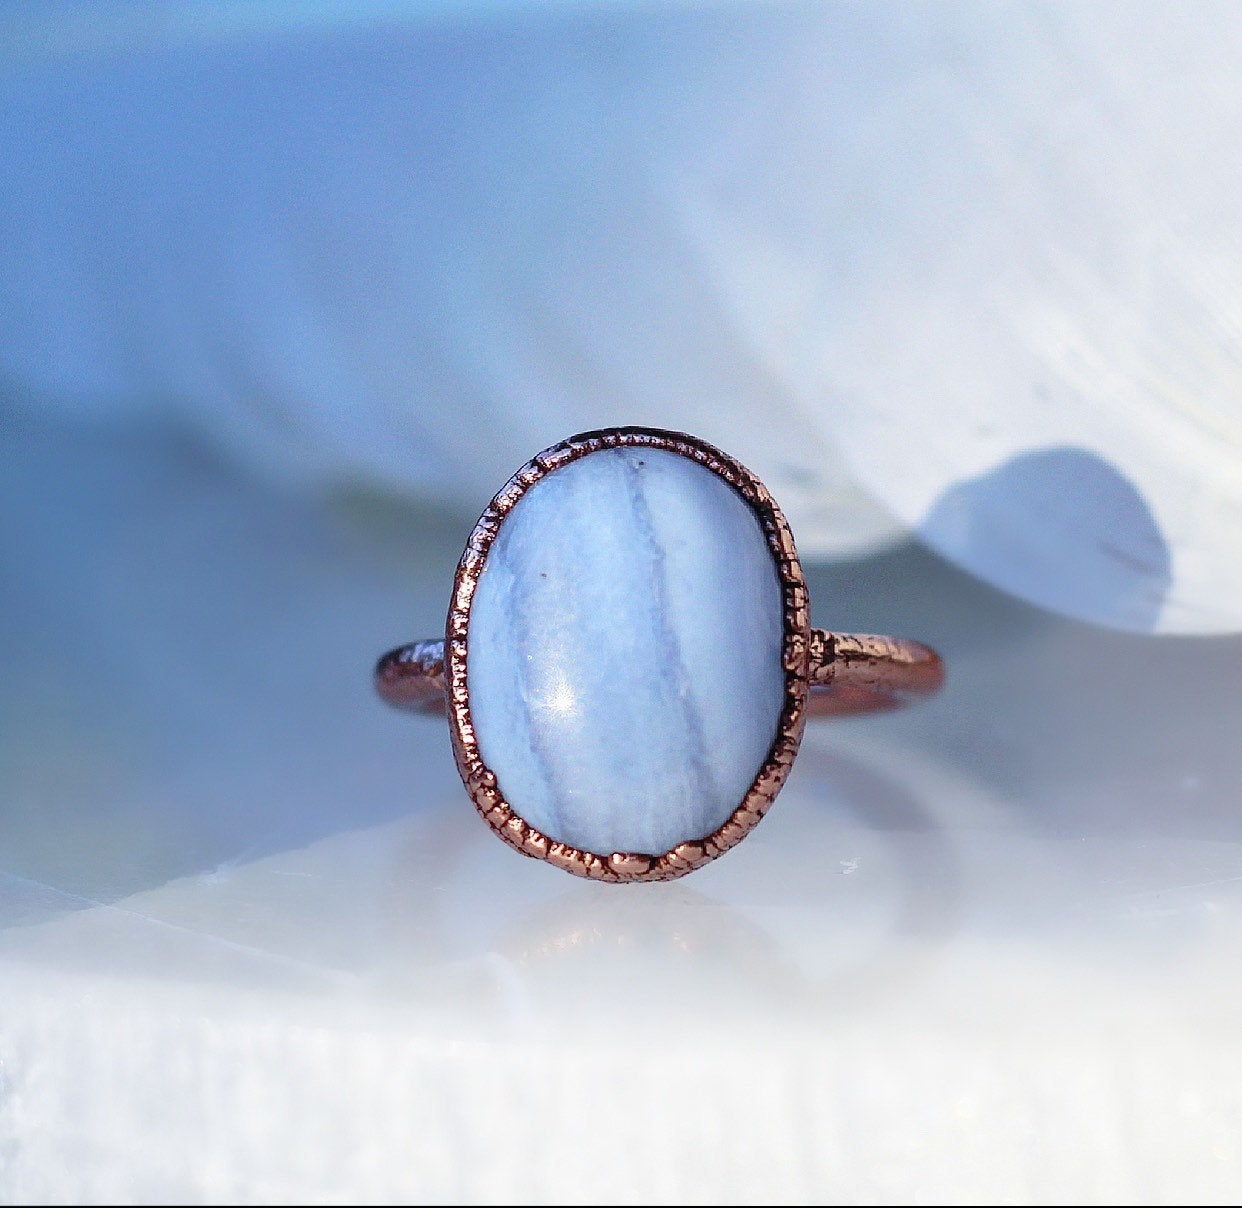 Blue Lace Agate Ring, Blue Lace Agate Crystal Statement Ring, Blue Oval Gemstone Ring, Oval Raw Stone Ring, Blue Lace Agate Stone Jewelry